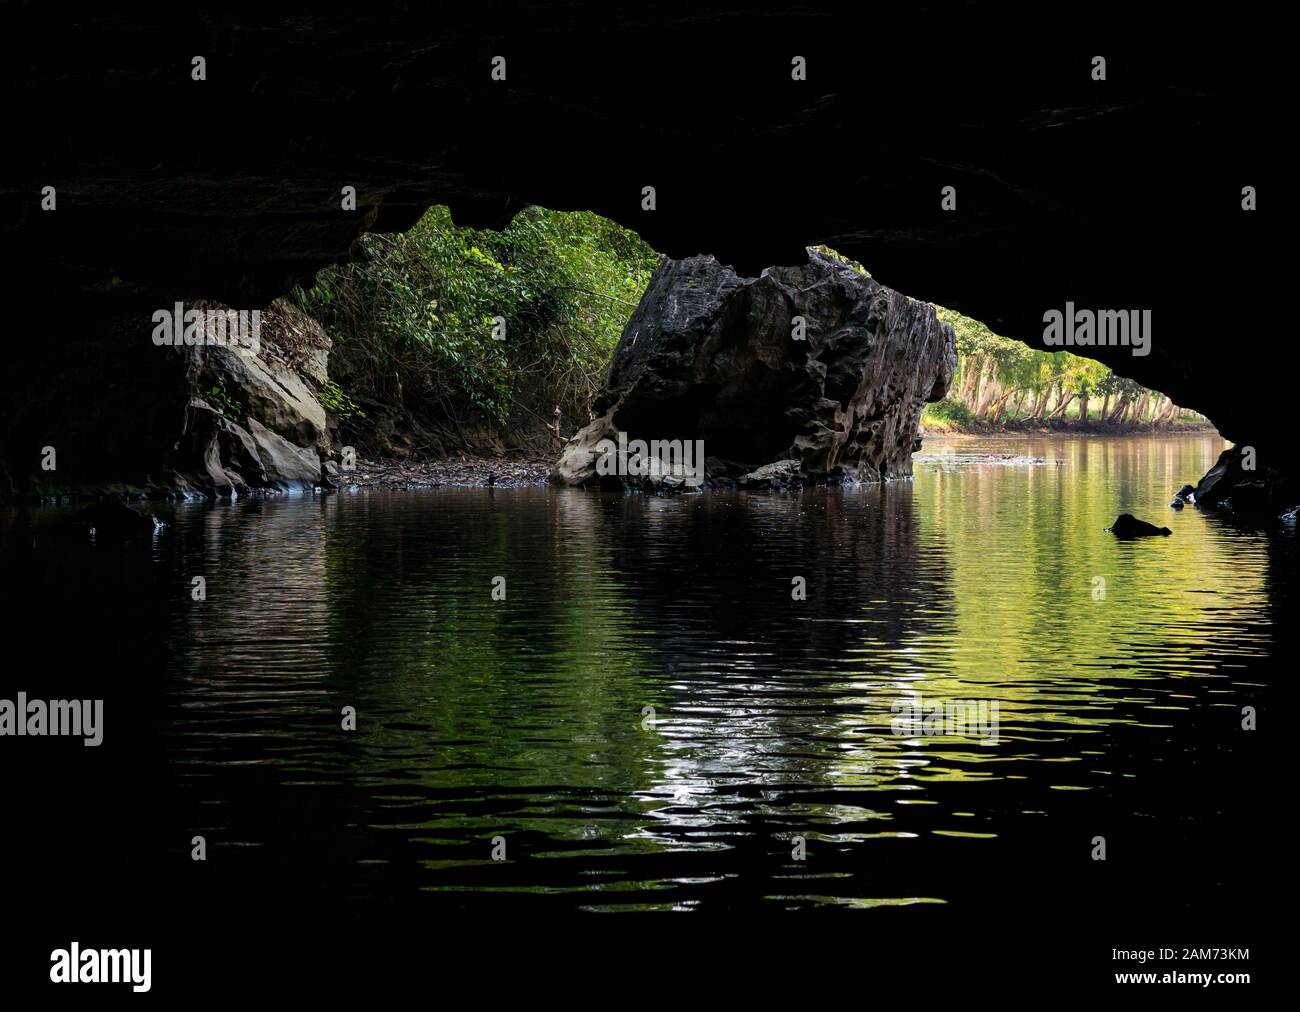 Cave exit or entrance with river running through, Tam Coc cave system, Ninh Binh, Vietnam, Asia Stock Photo